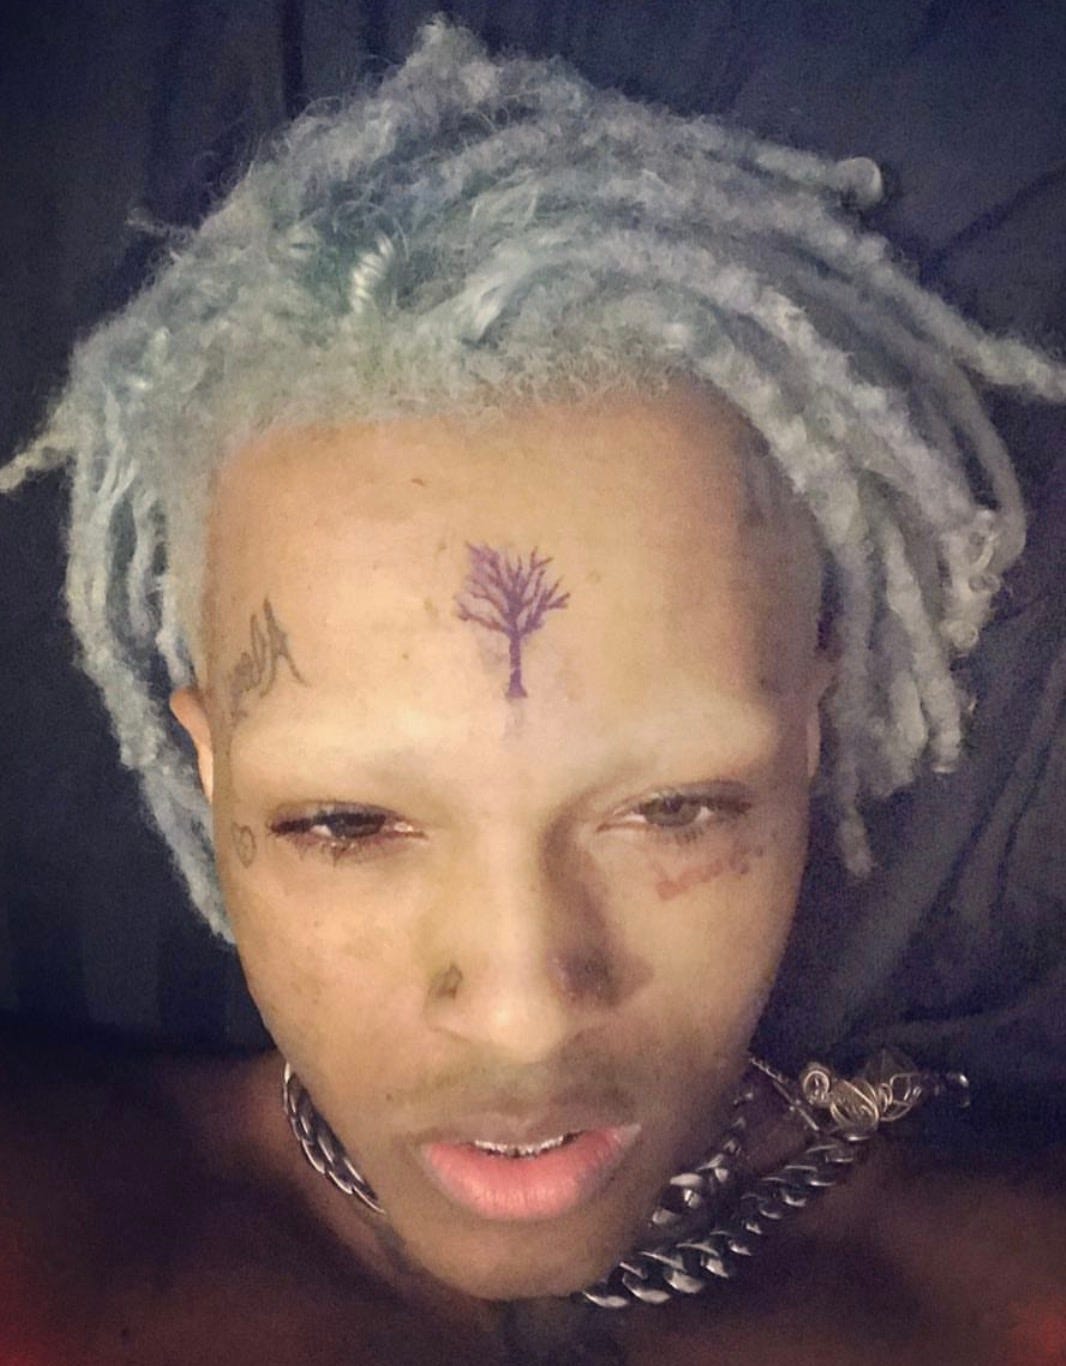 worst face tattoos rappers